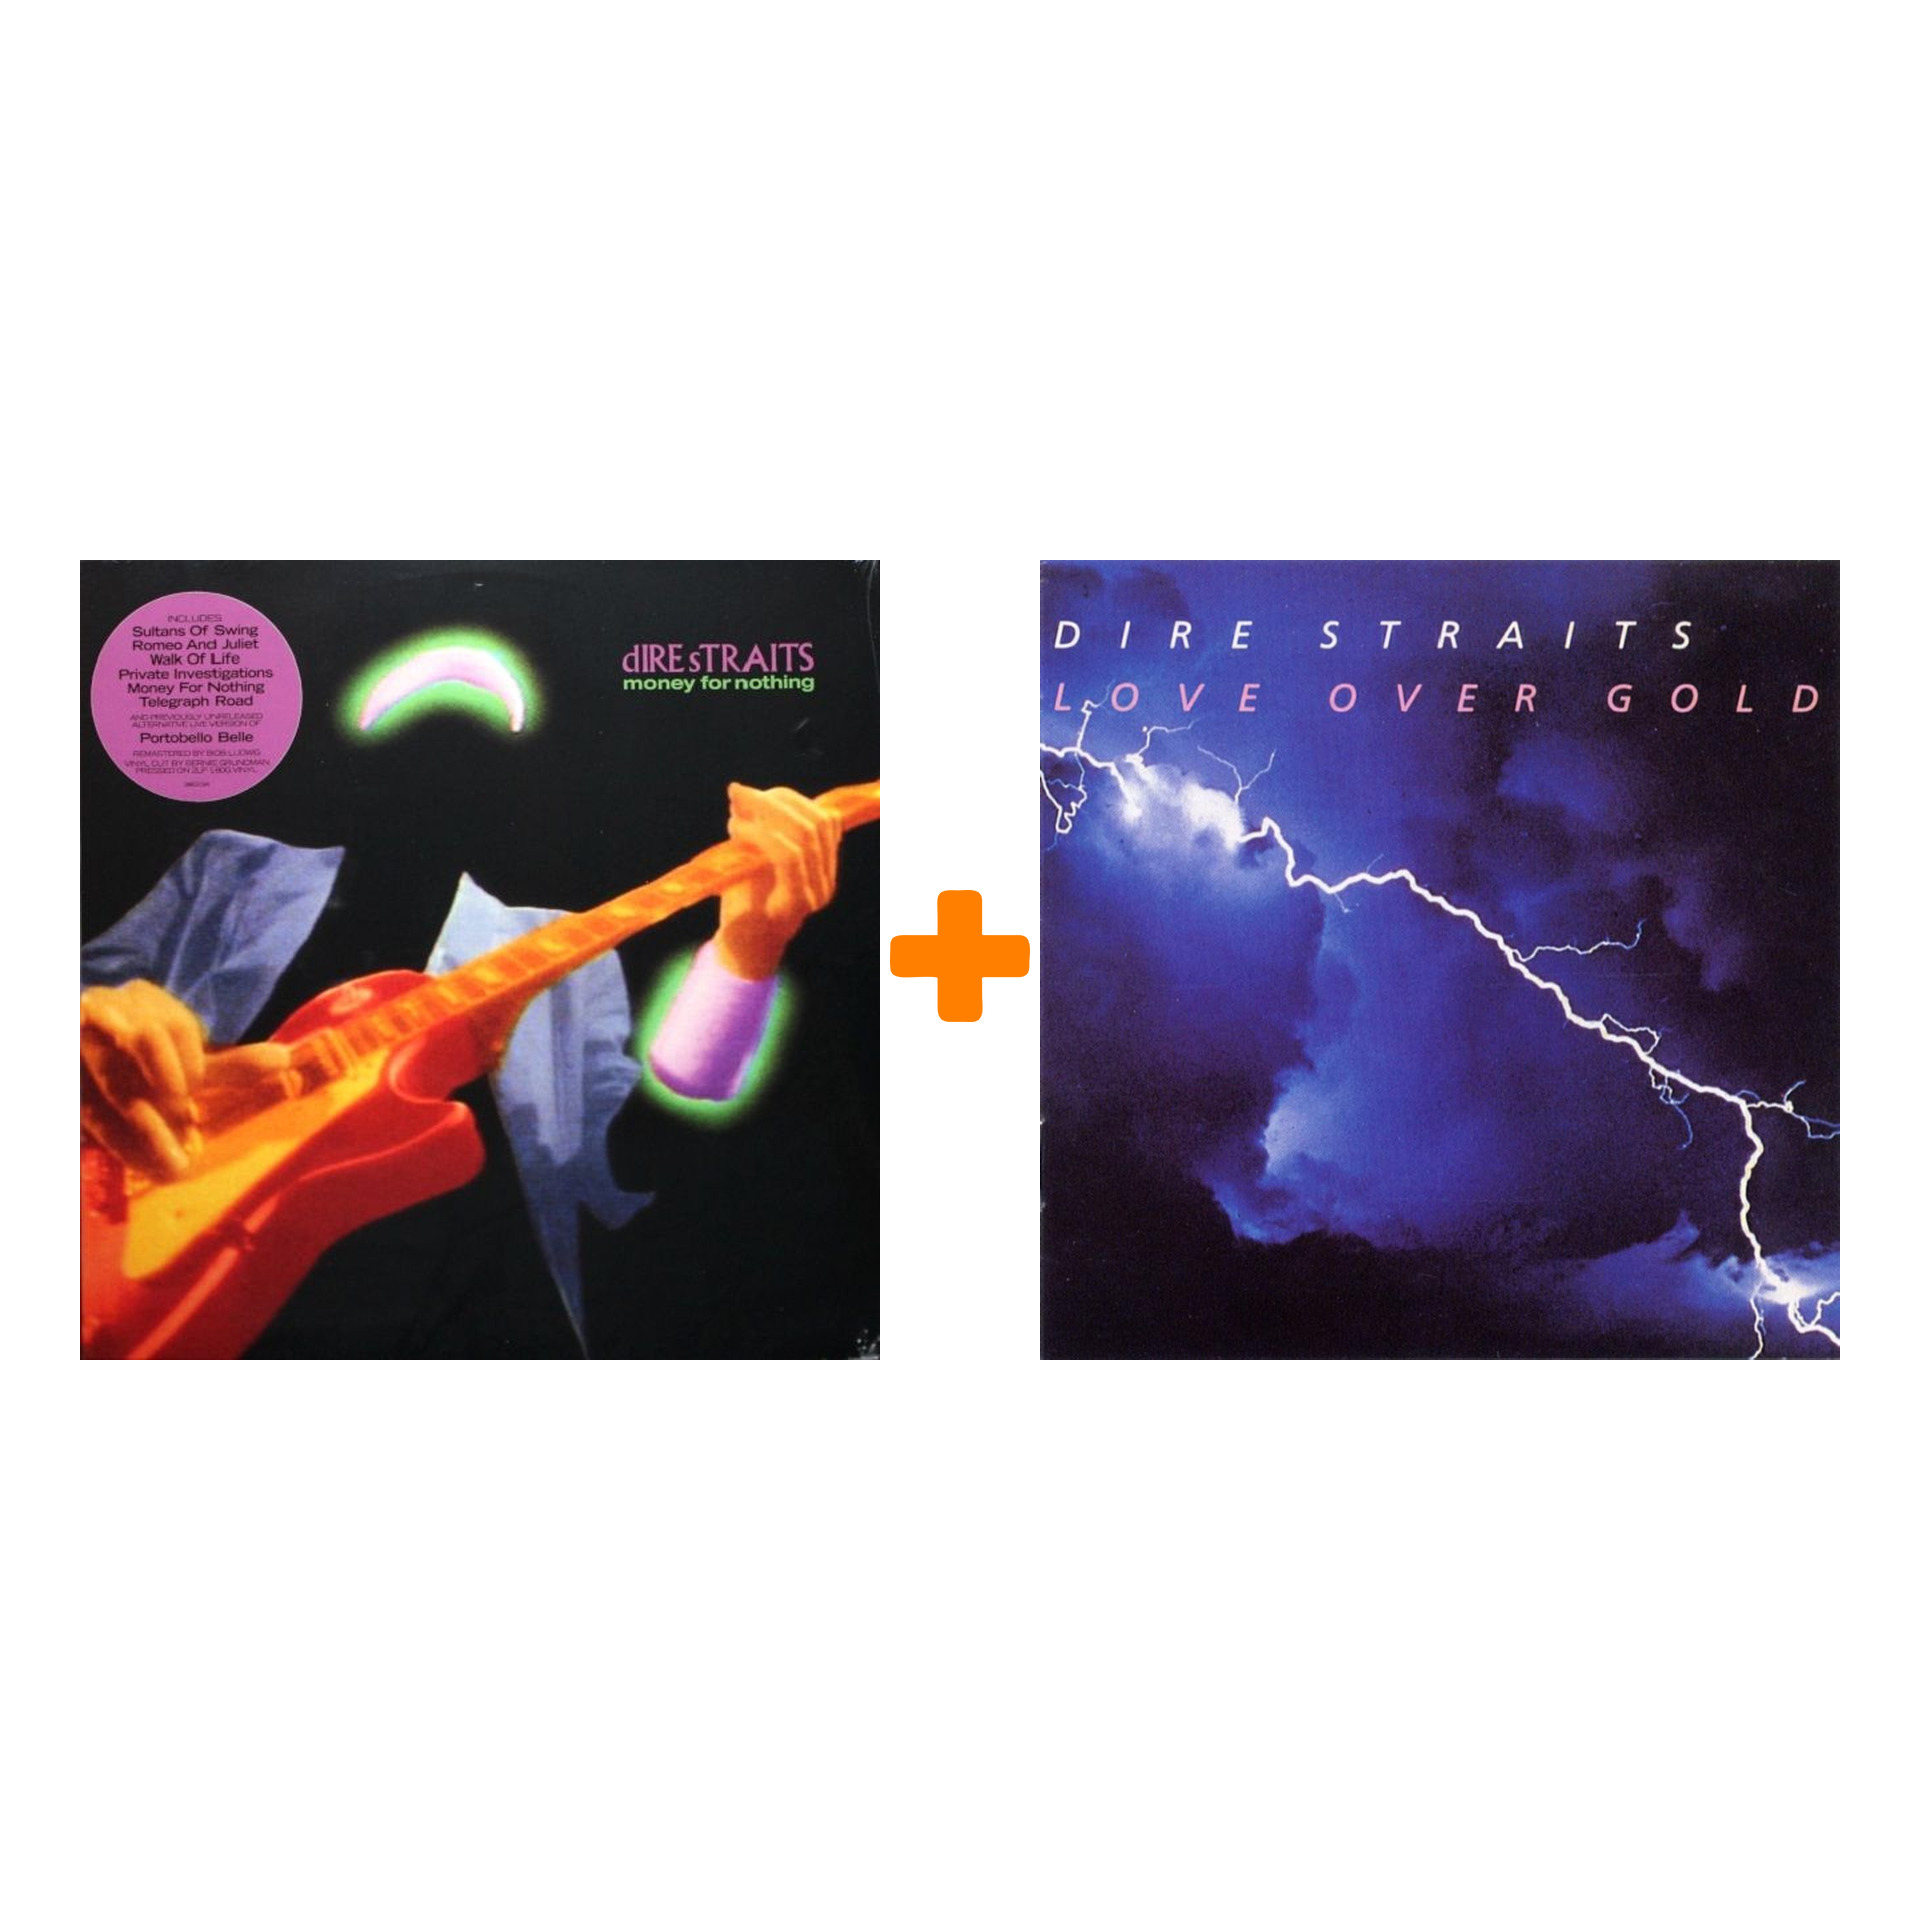 DIRE STRAITS Money For Nothing Greatest Hits 2LP / Love Over Gold LP Набор